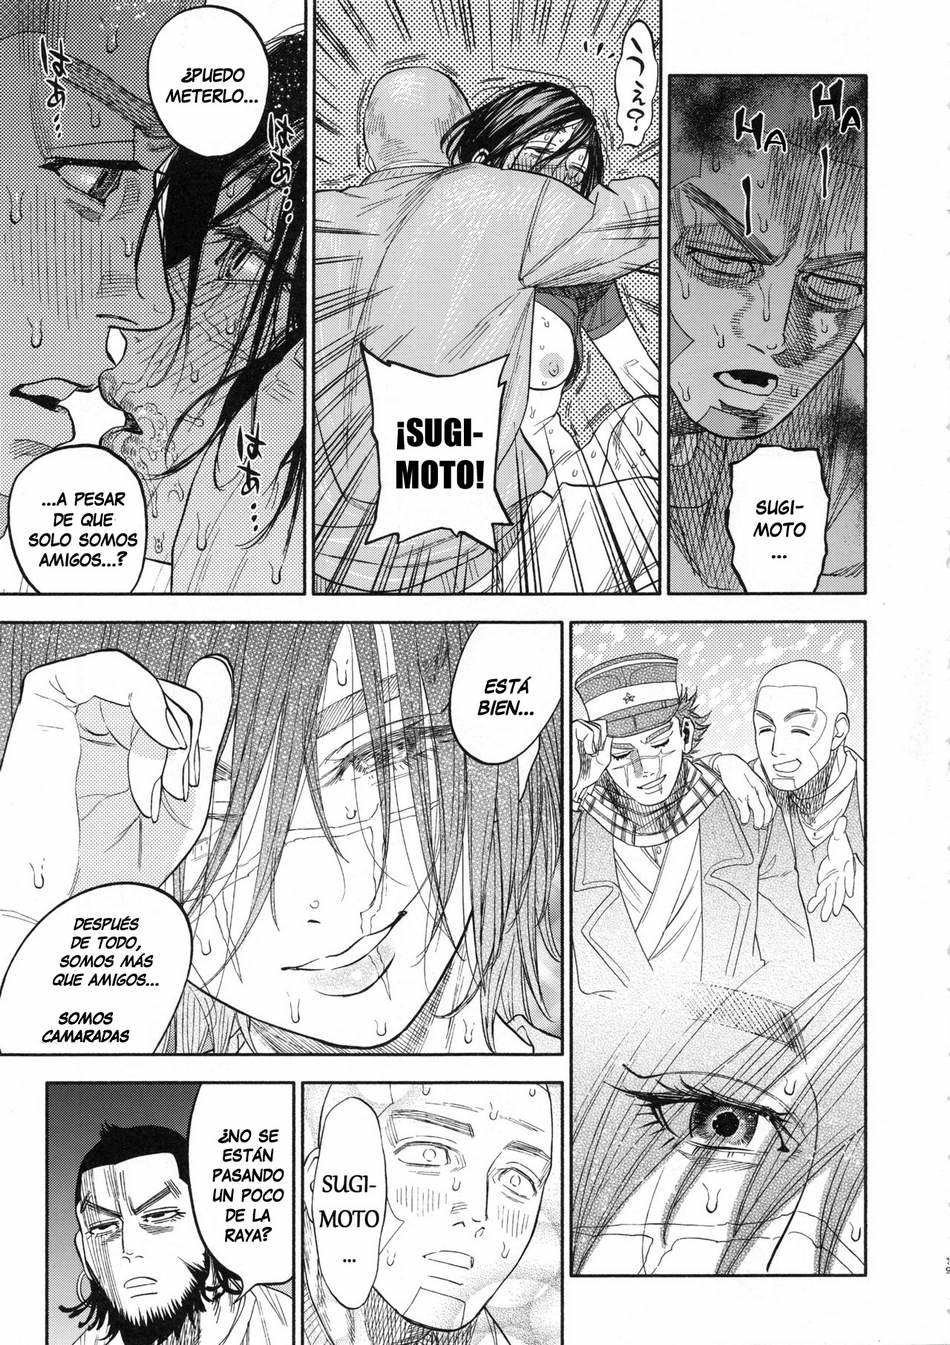 Lets Have Some Sea Otter Meat With Sugimoto-san (Golden Kamuy) - Nishida - 17